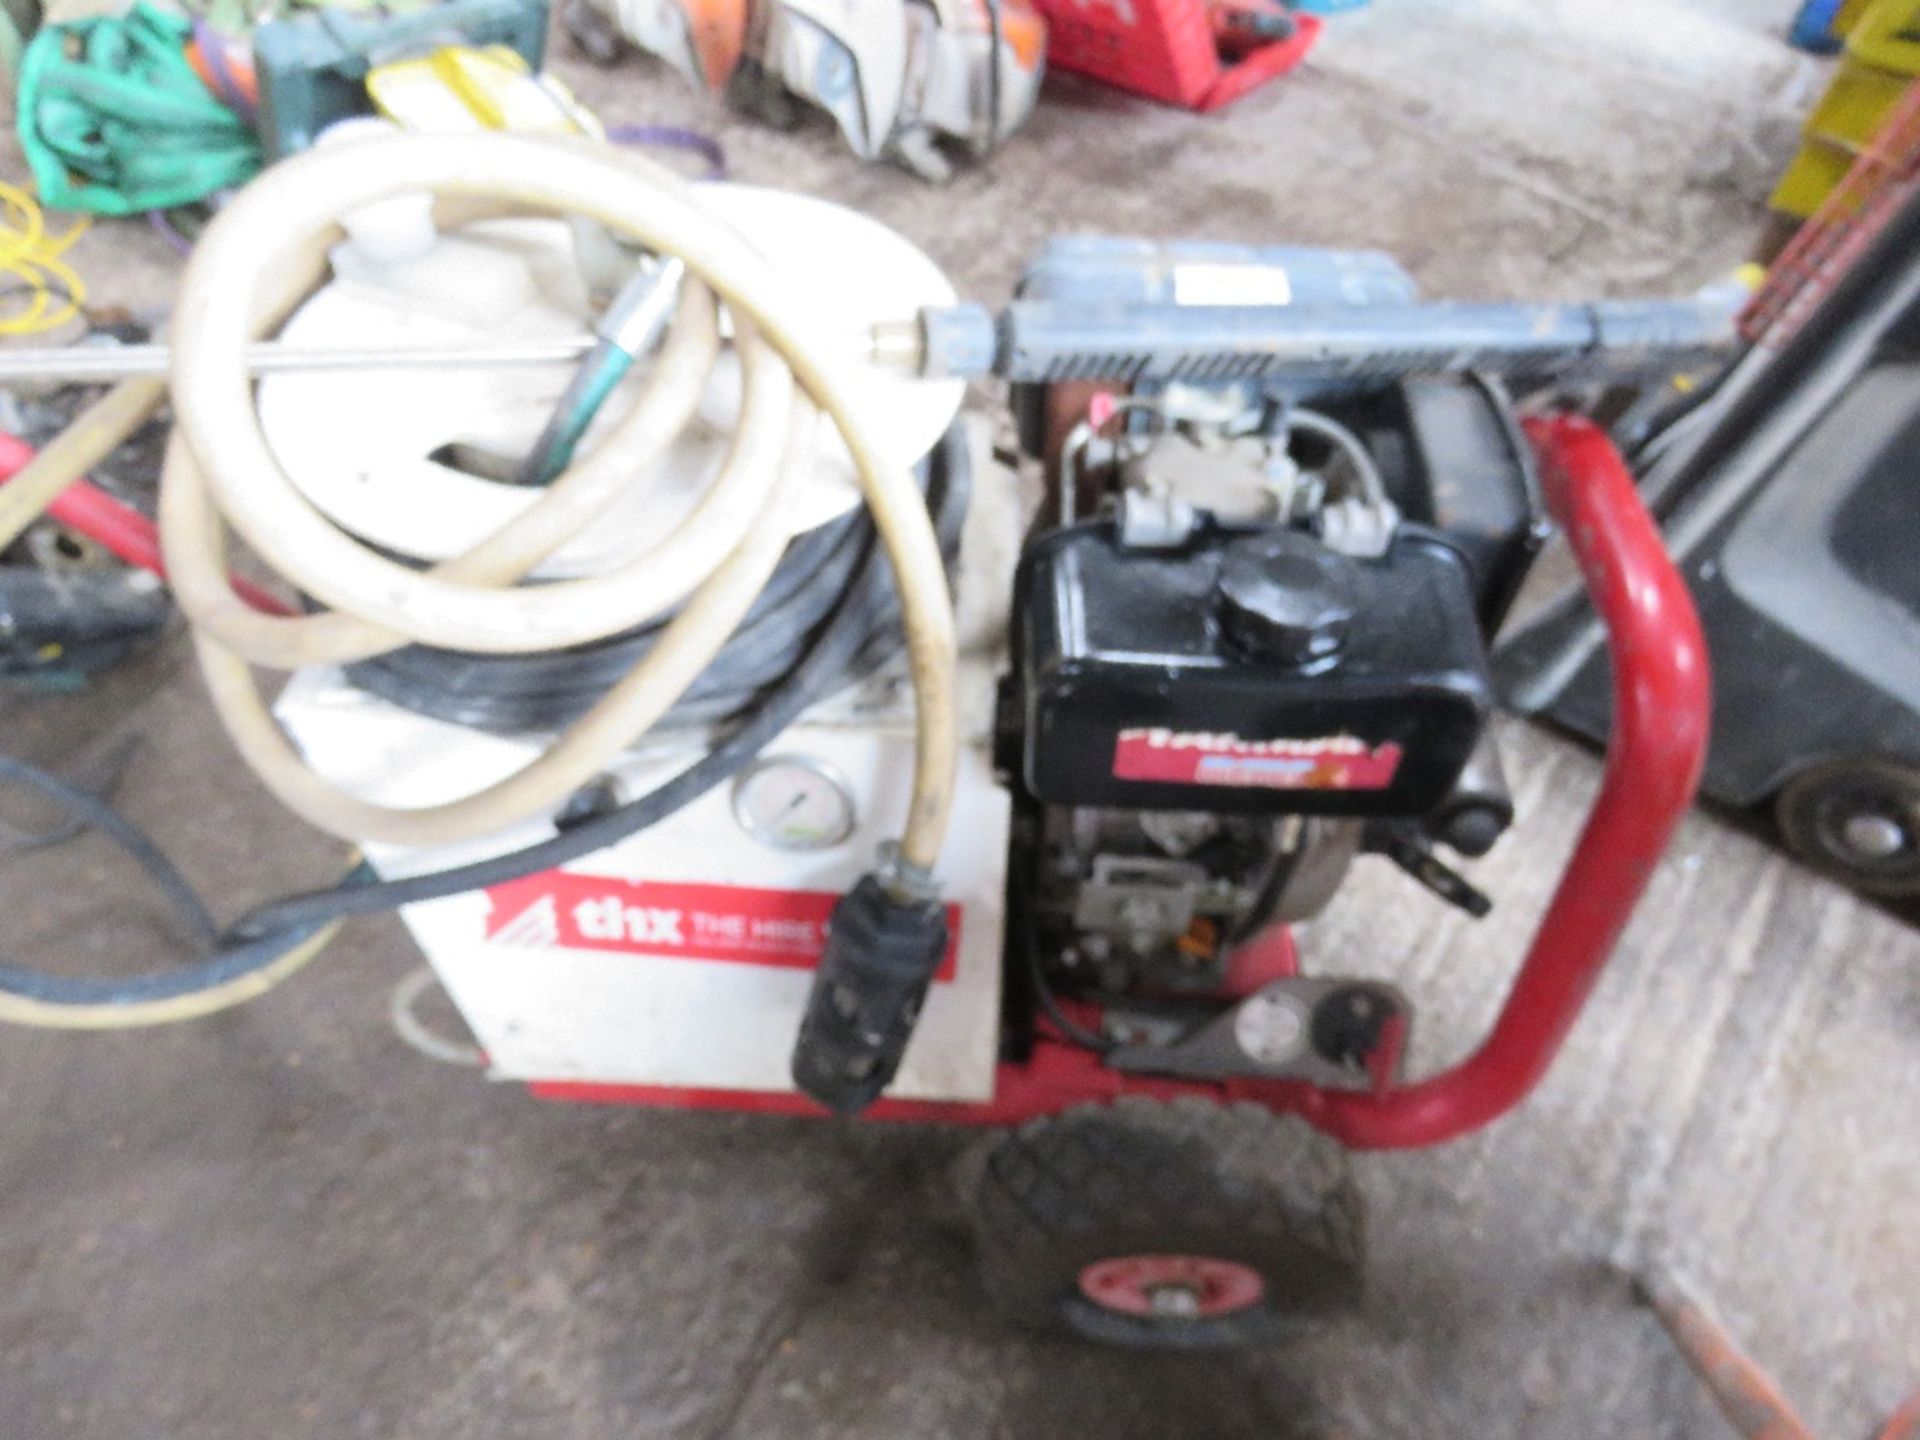 BRENDON YANMAR ENGINED POWER WASHER. STARTS AND RUNS. THX4665 - Image 2 of 2